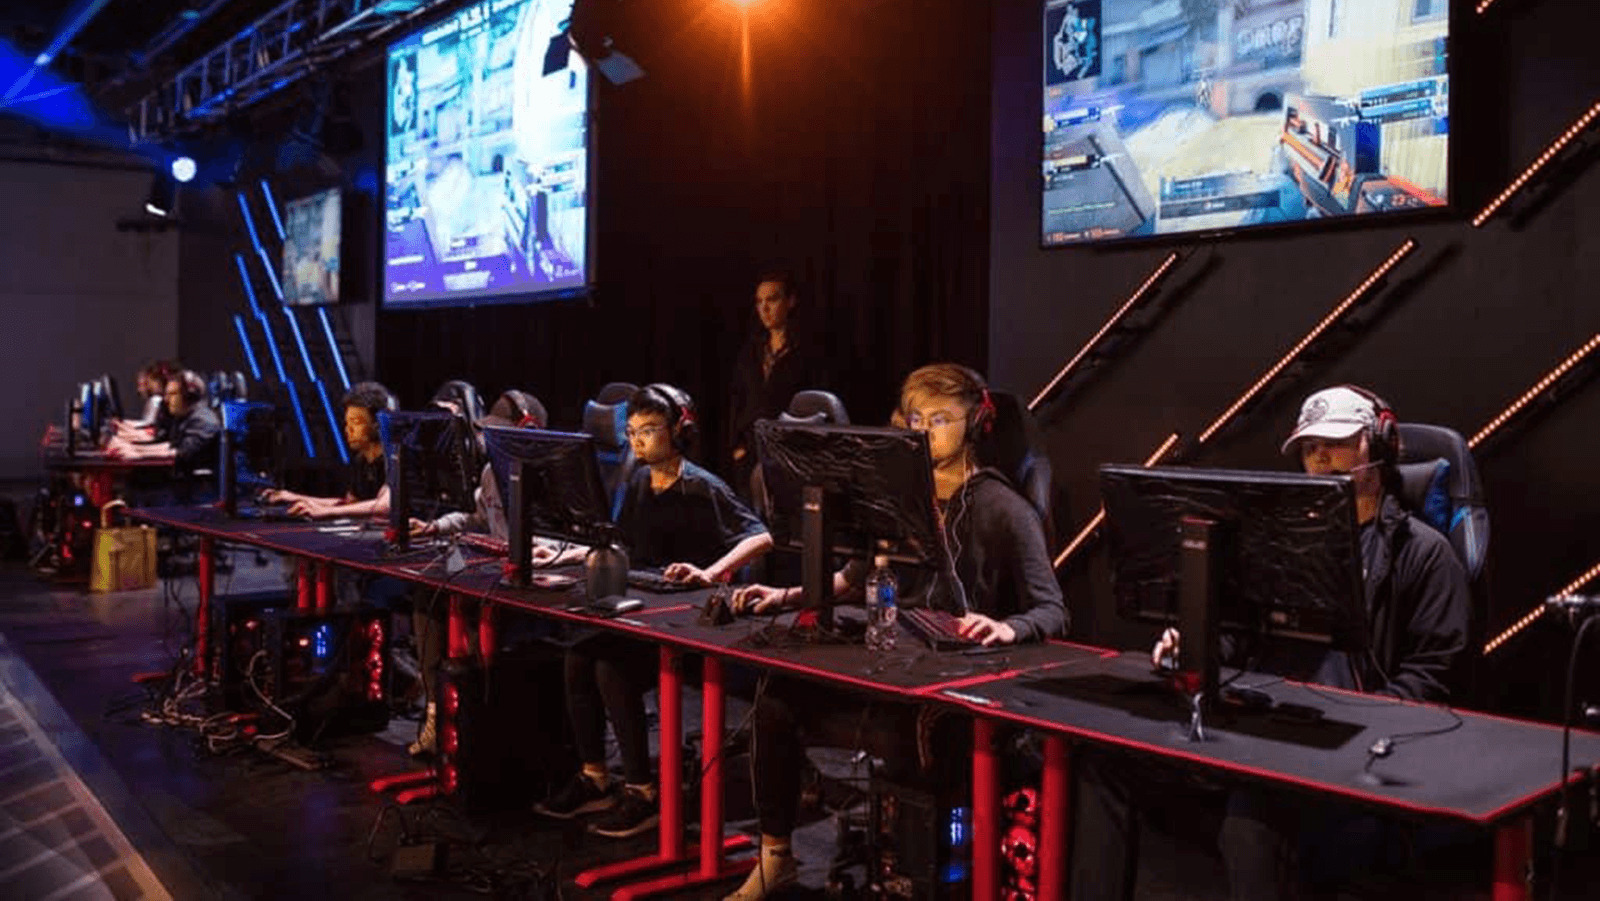 Esports: The Future of Competitive Gaming